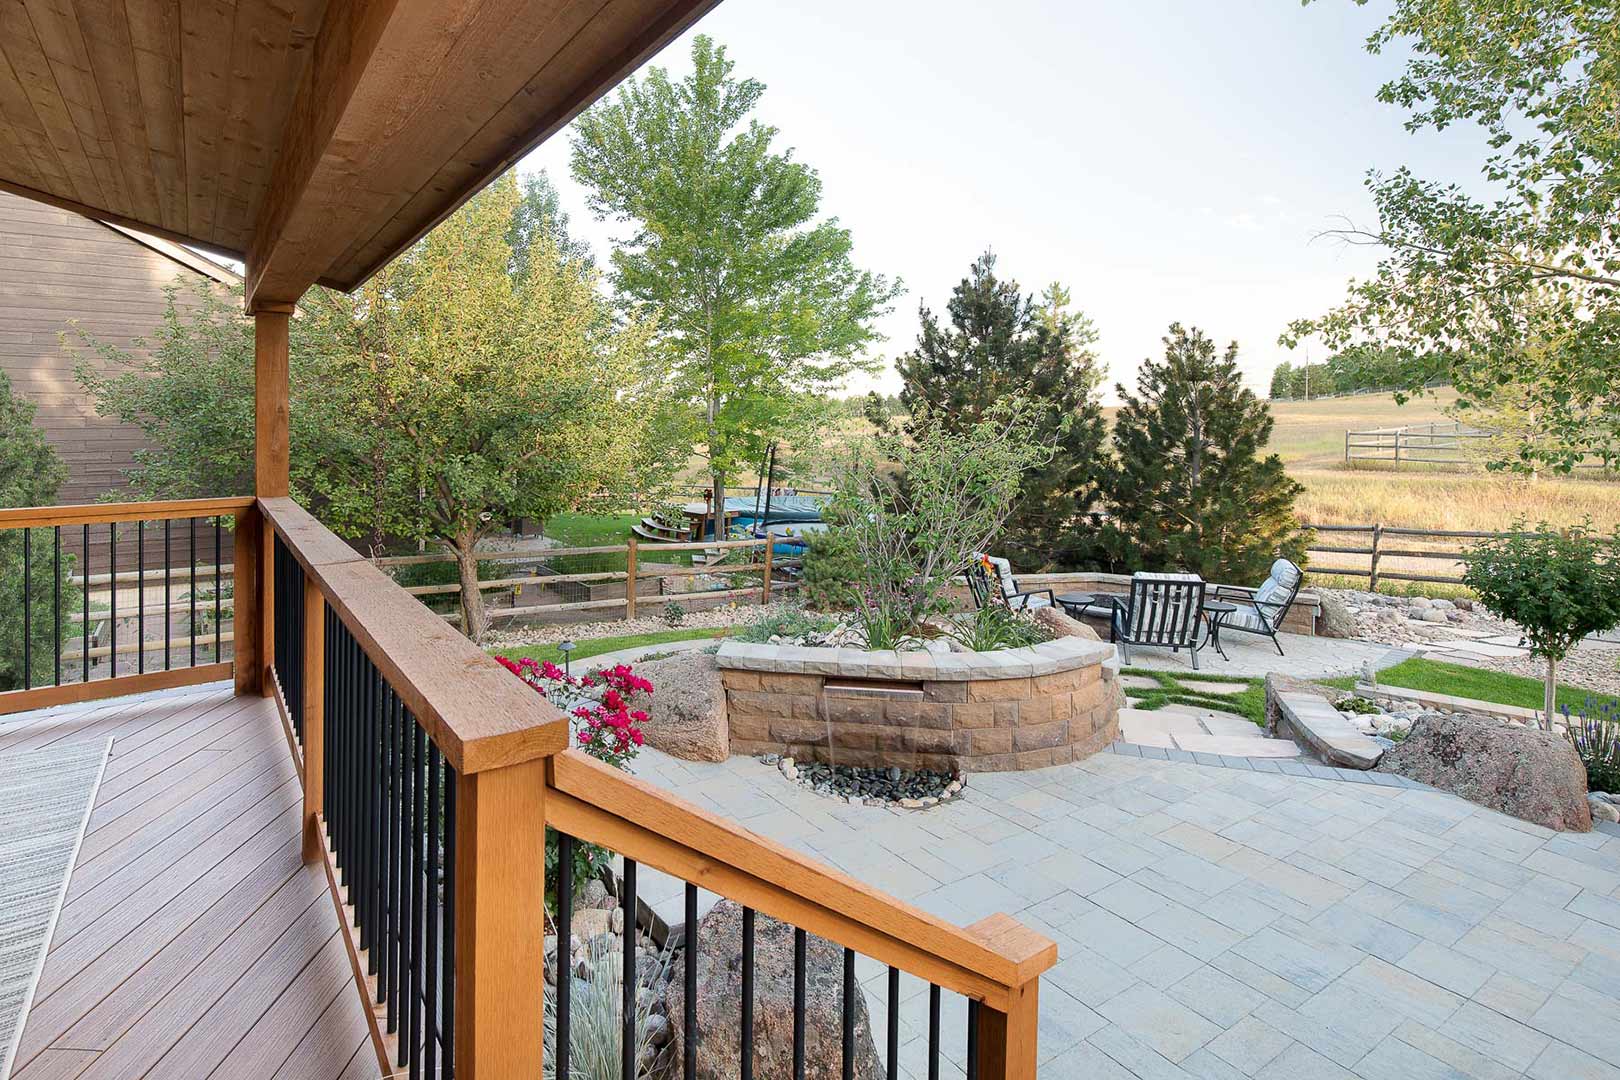 View from the covered patio looking down at the paved stone patio and built in water feature and fire pit designed by Freestone Design-Build.